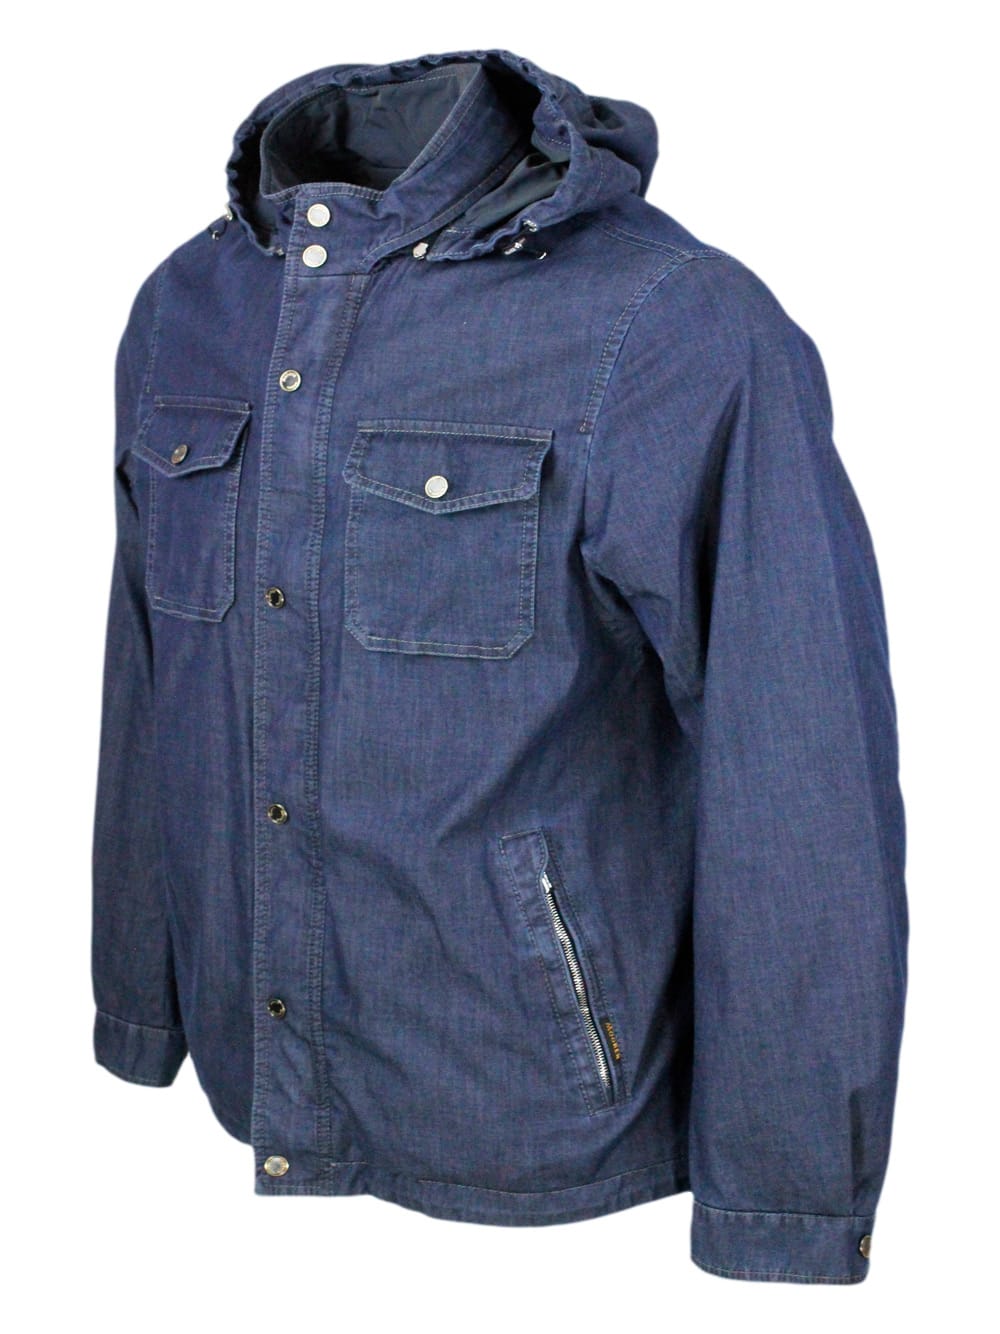 Shop Moorer Anorak Shirt Jacket From The Water Proof Line With 2 Umbrellas With Detachable Hood In Light And Sof In Denim